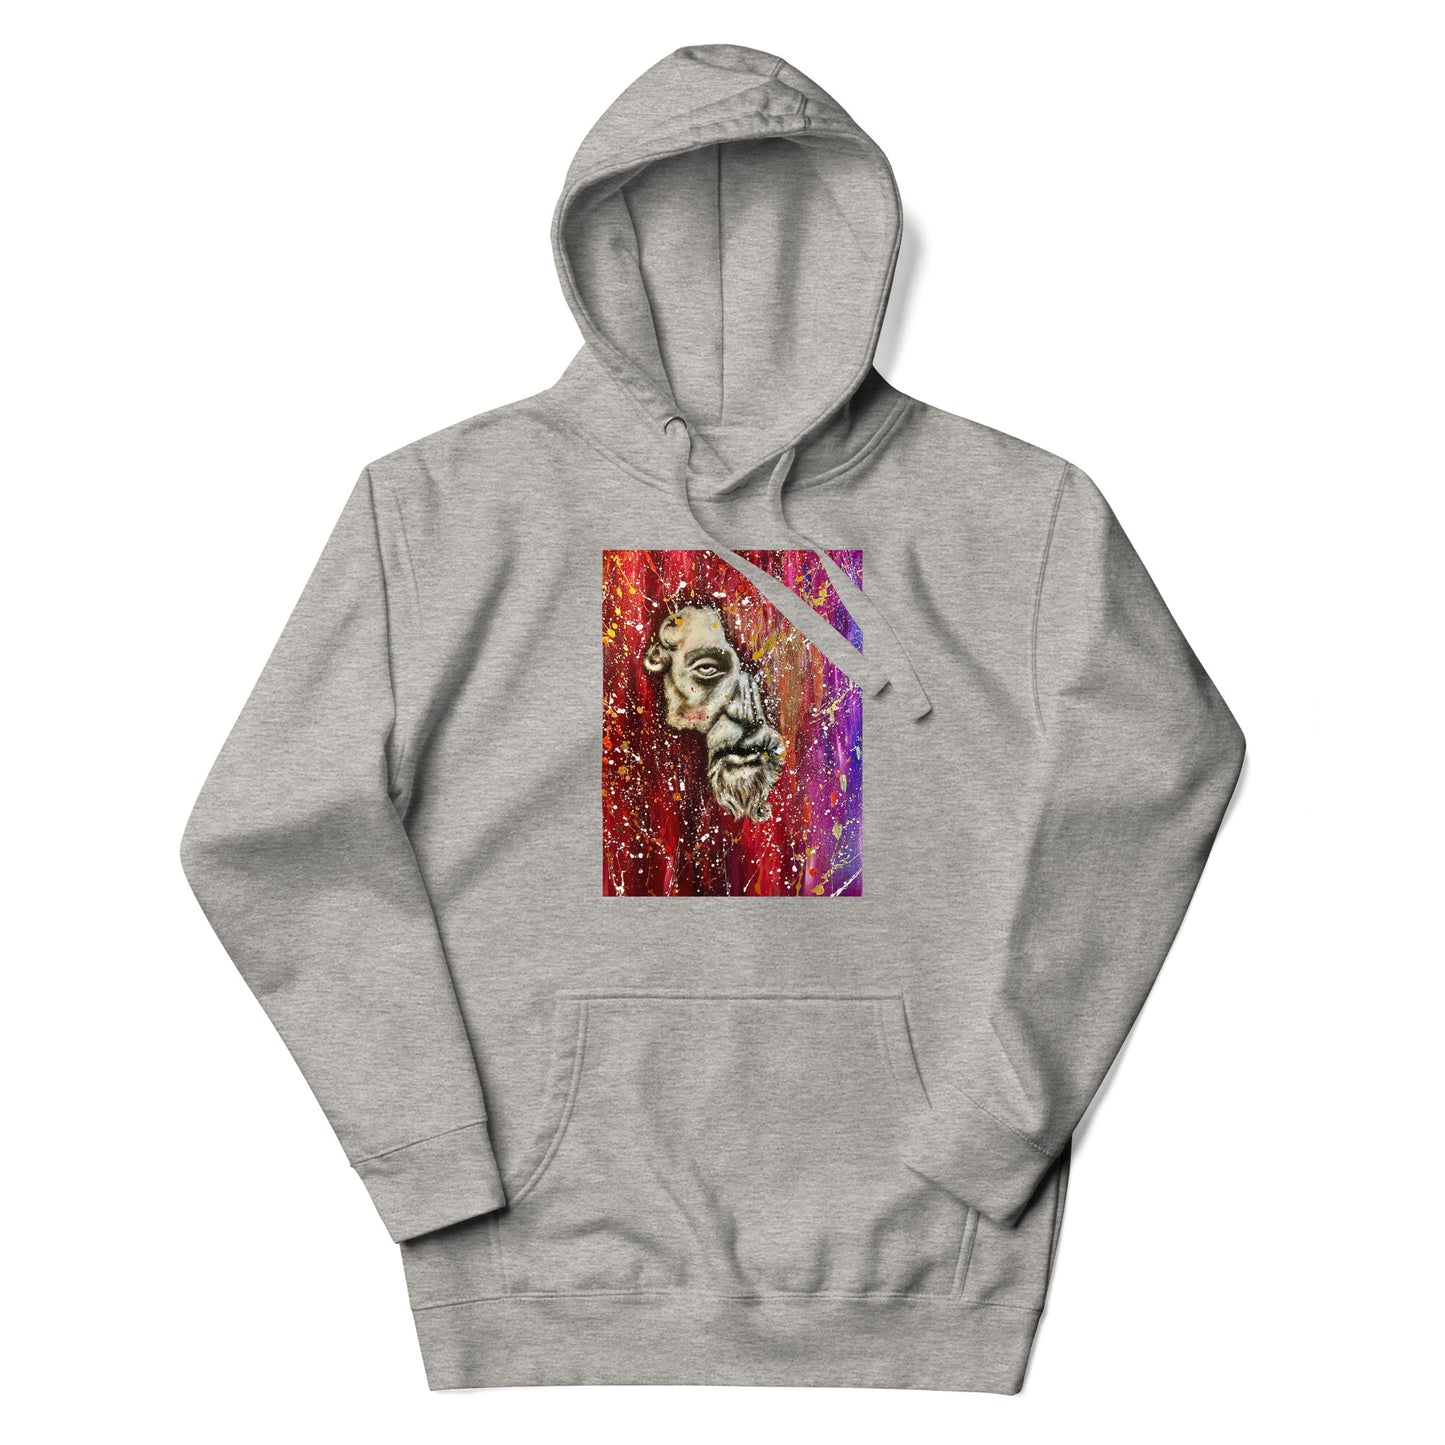 "The Soul Becomes..." Unisex Hoodie